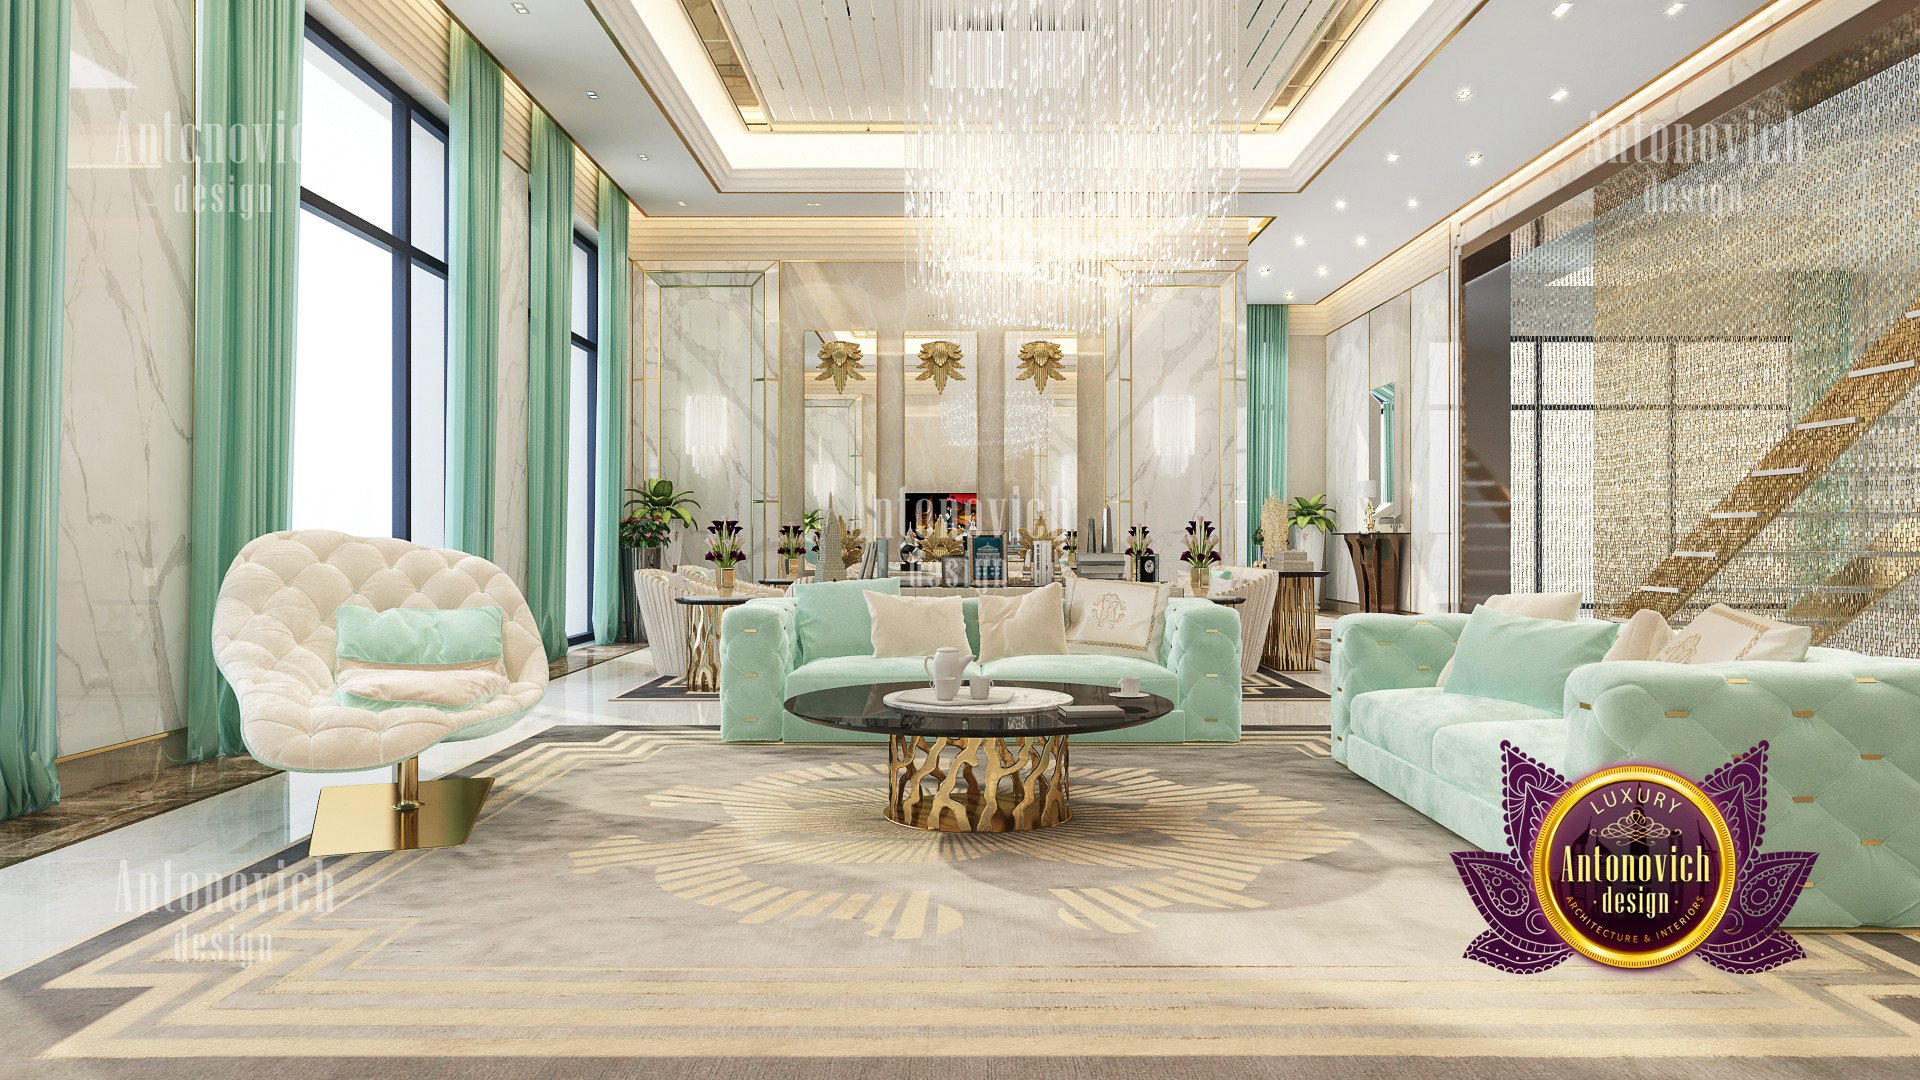 Luxury Interior Design: Beauty And Comfort In Every Detail